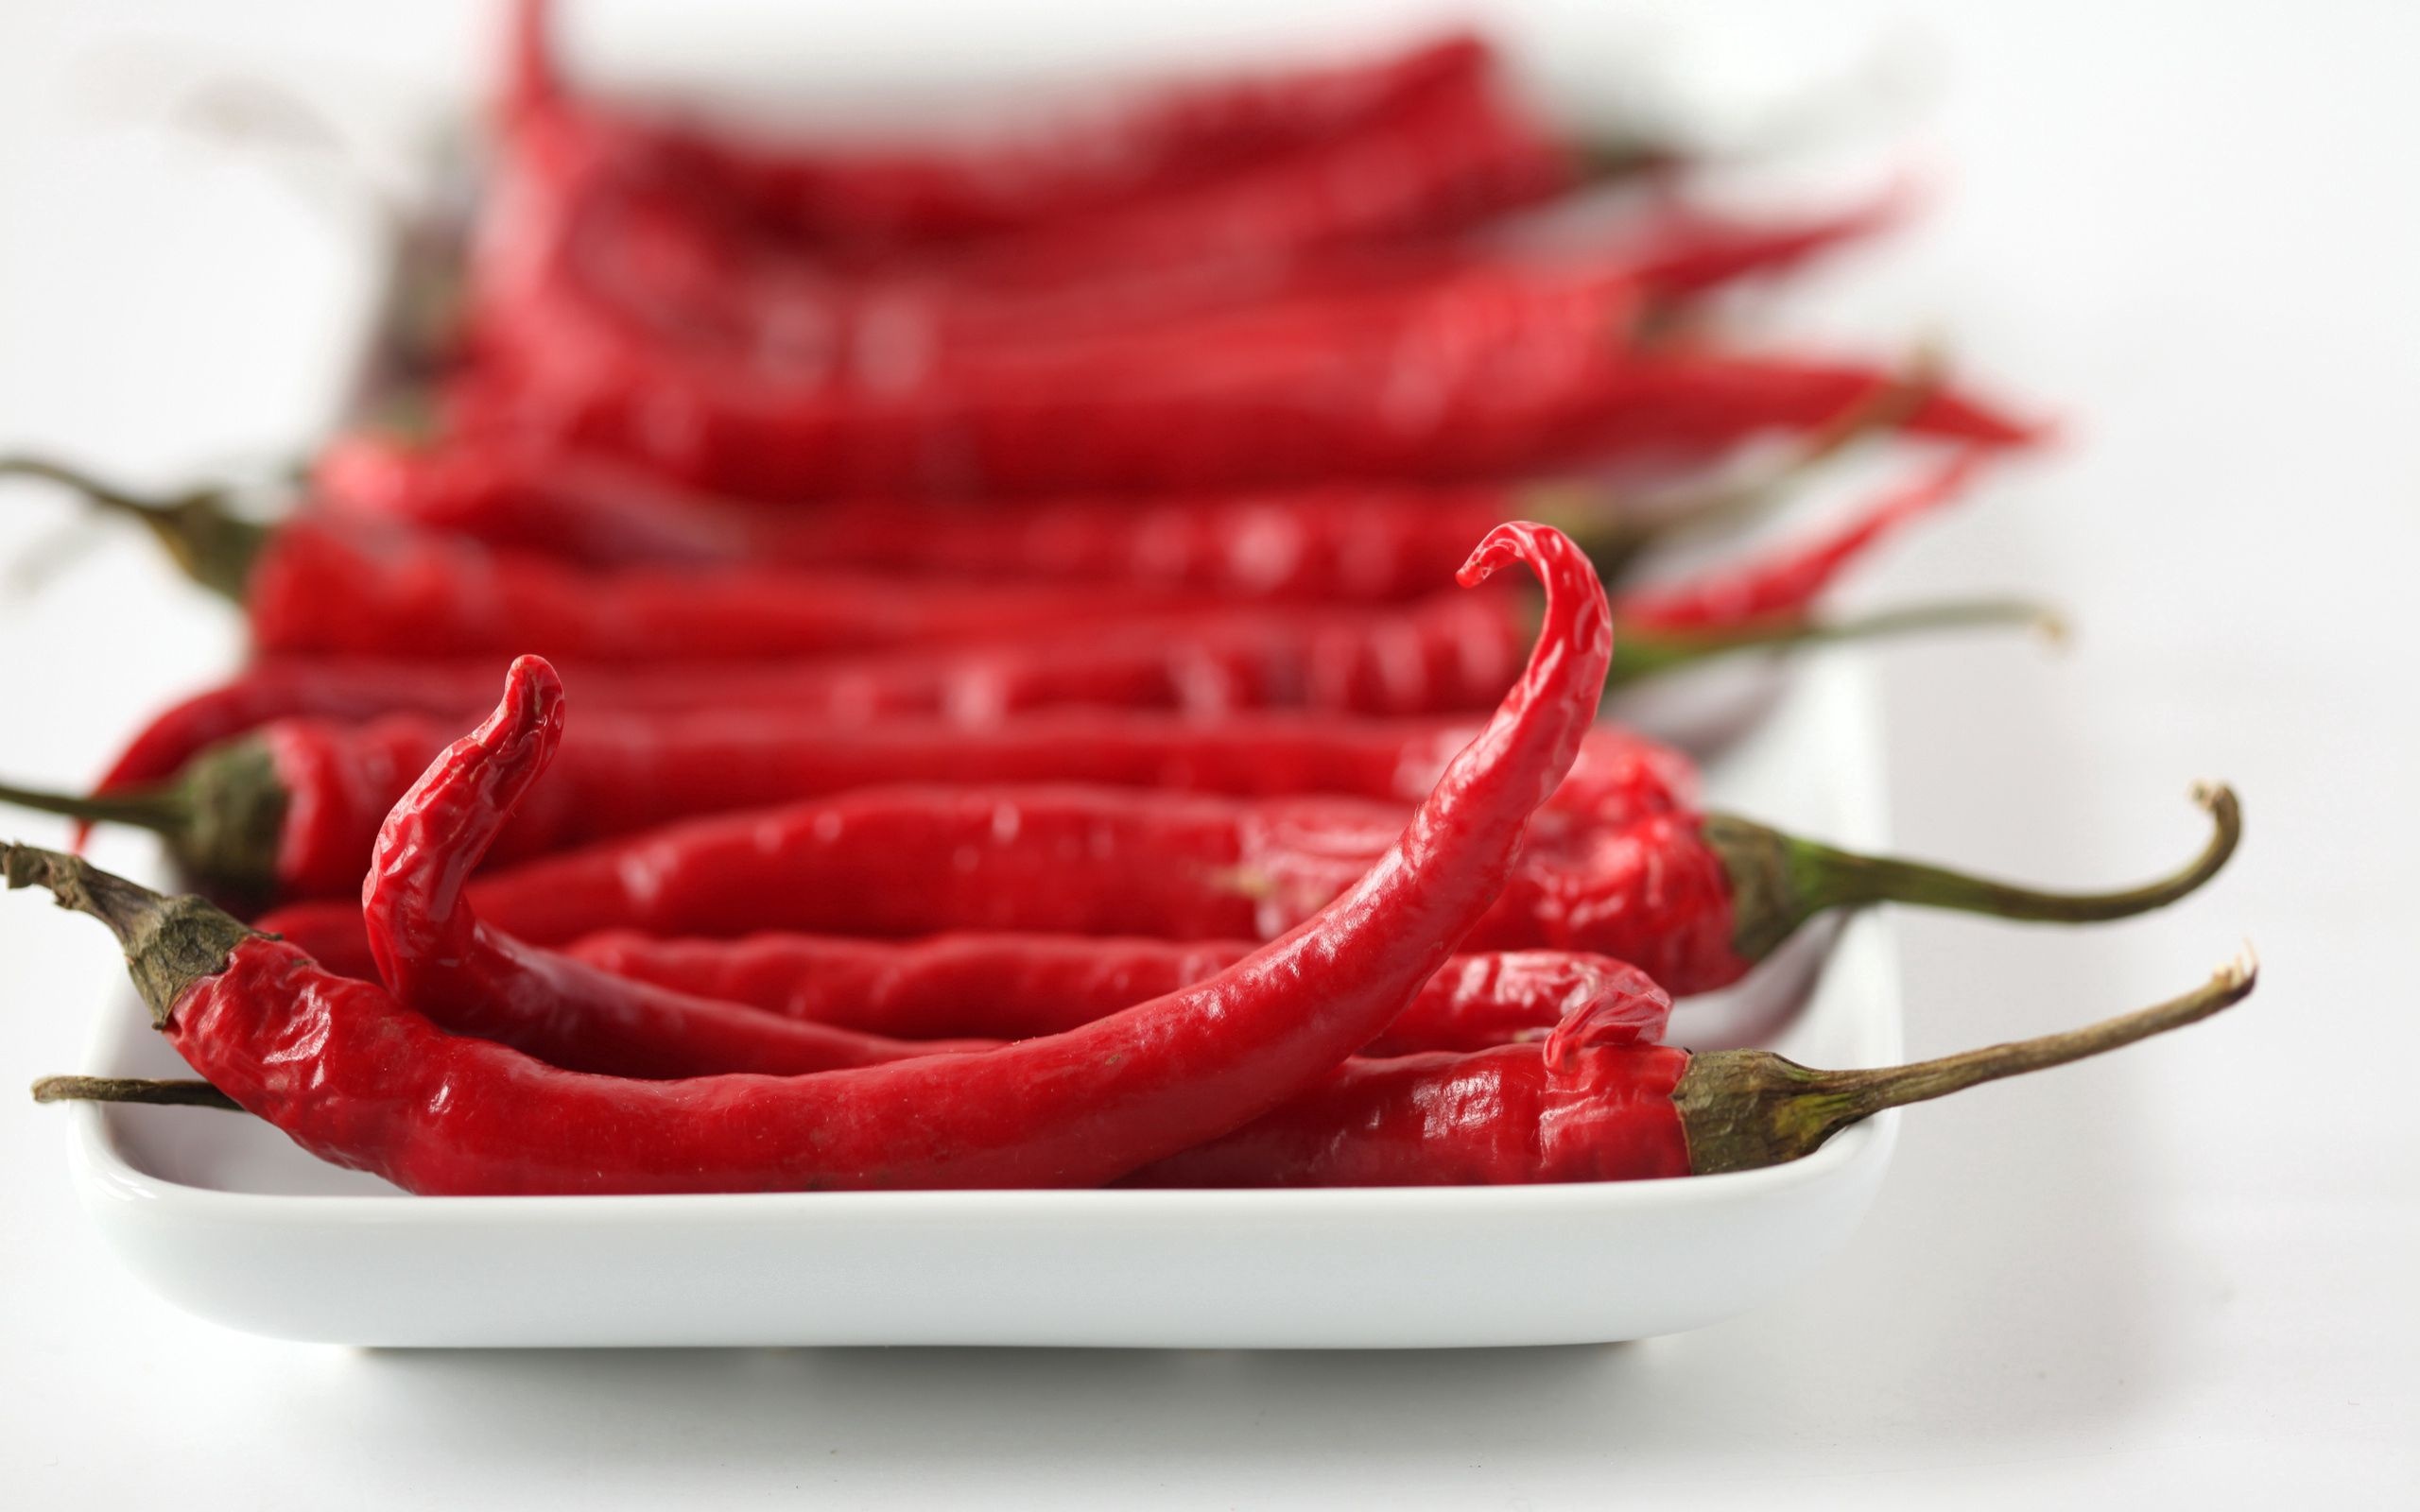 Chili wallpaper download, Android and iPhone, Mobile screen, Fiery spice, 2560x1600 HD Desktop